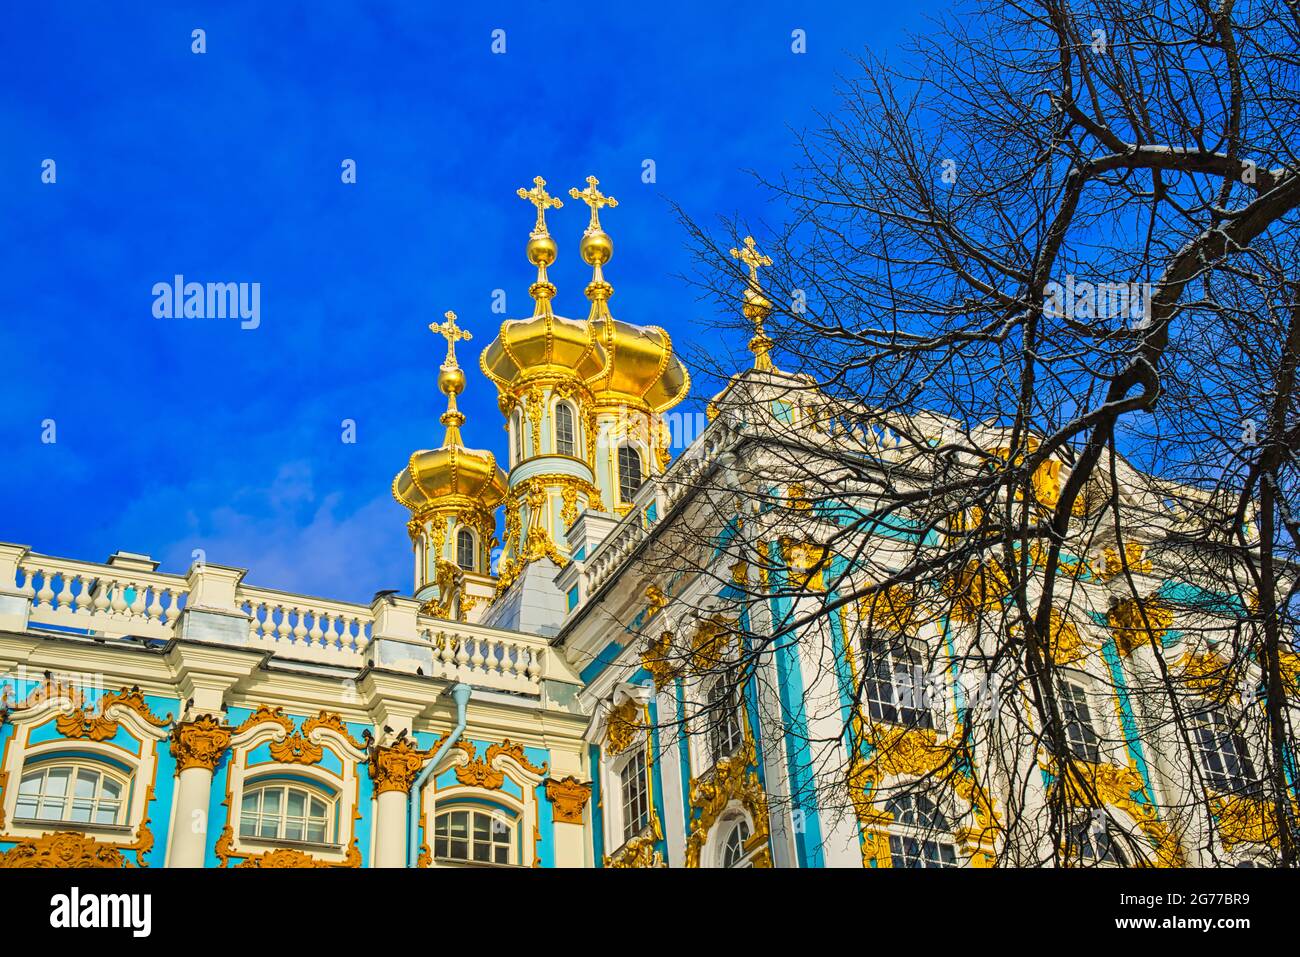 The Catherine Palace is a Rococo palace in Tsarskoye Selo (Pushkin). The summer residence of the Russian tsars. St. Petersburg, Russia. 2017. Stock Photo